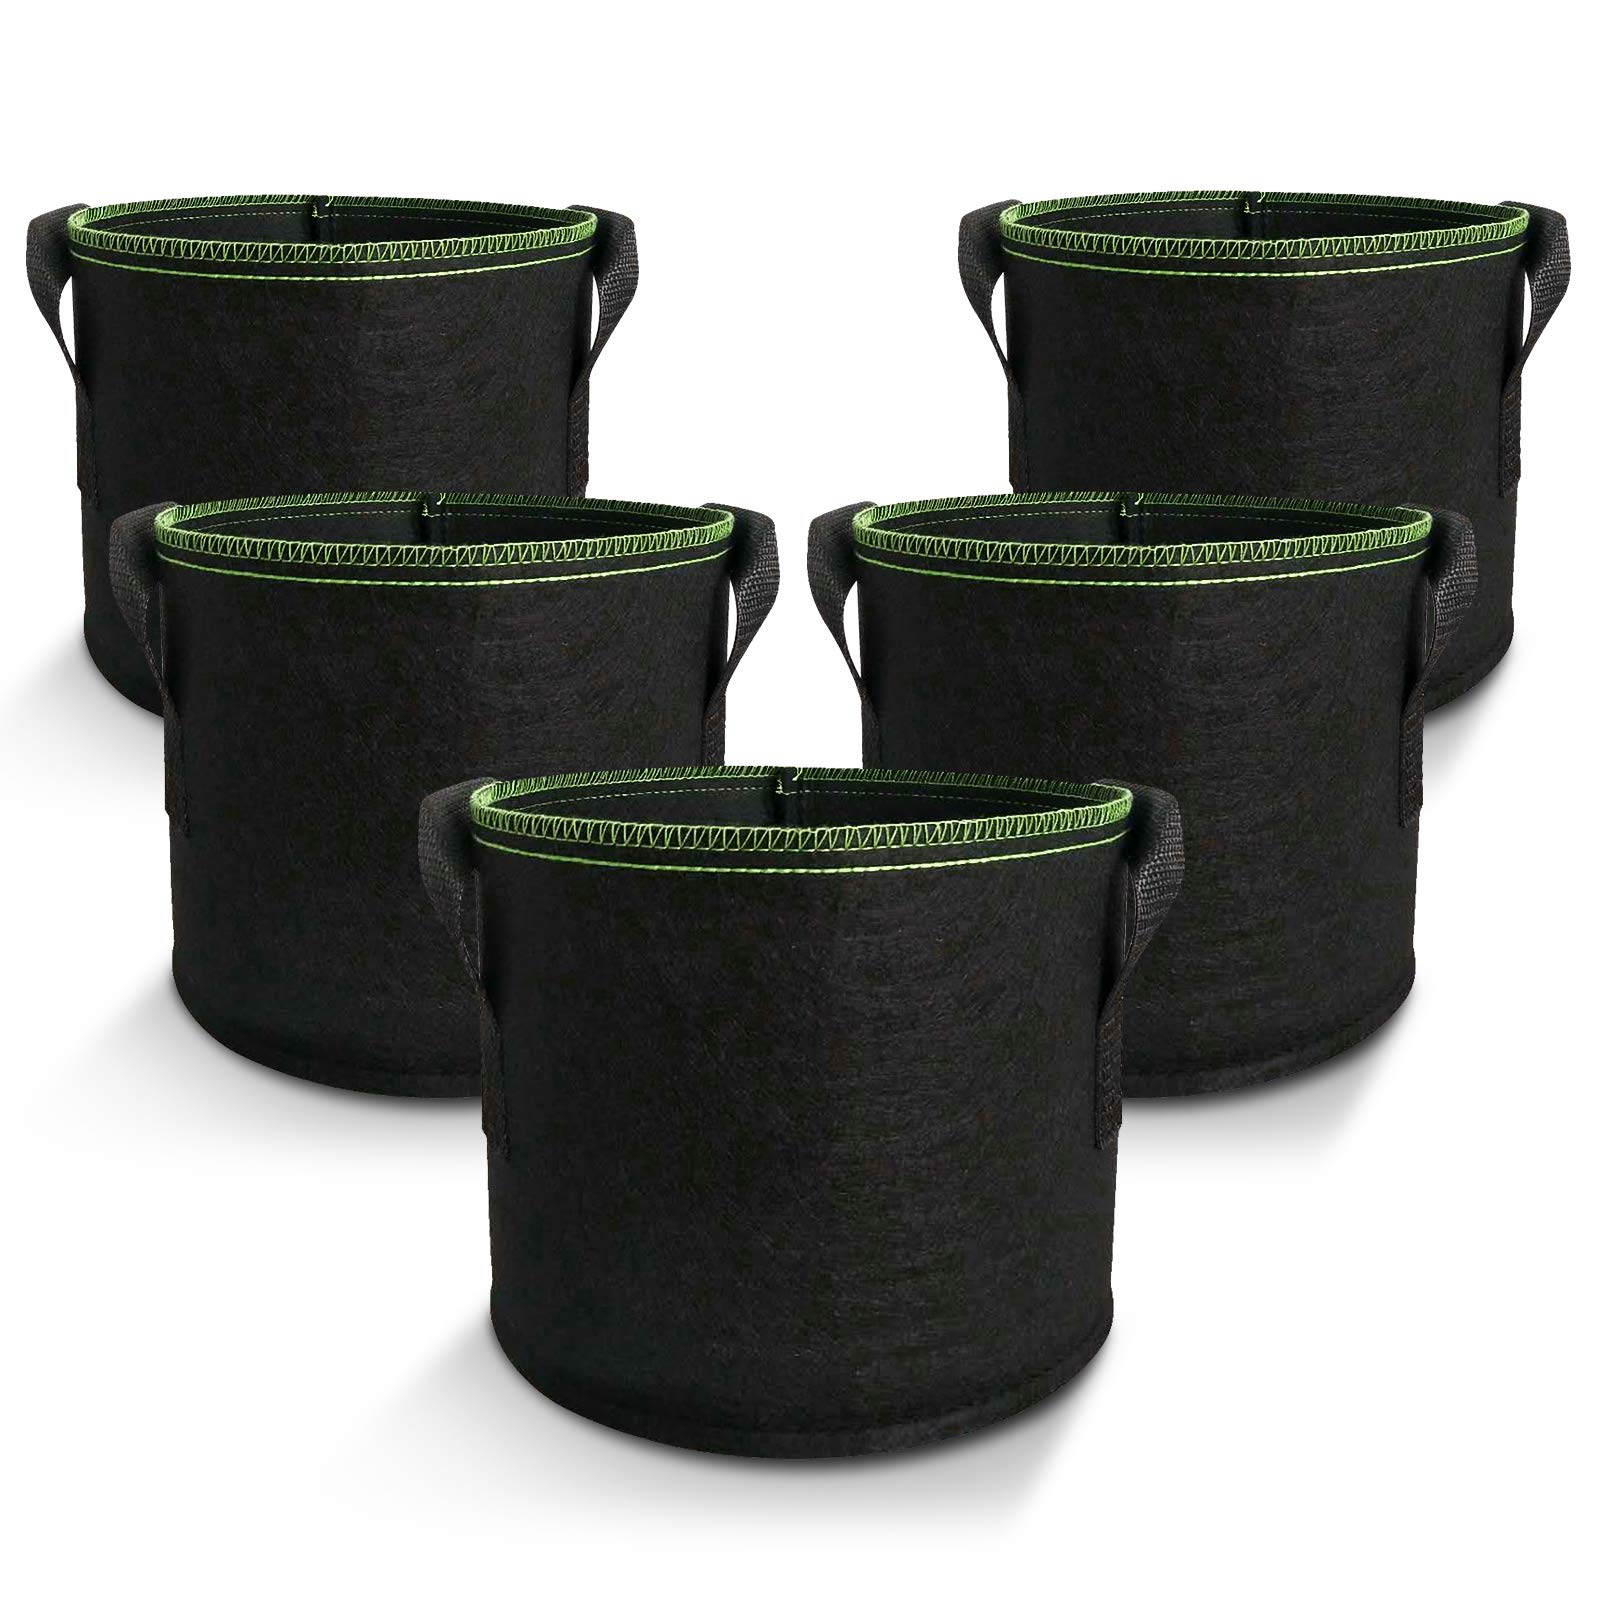 5-Pack 5 Gallons Plant Grow Bag | Flower Container Pots with Handles | Garden Planter